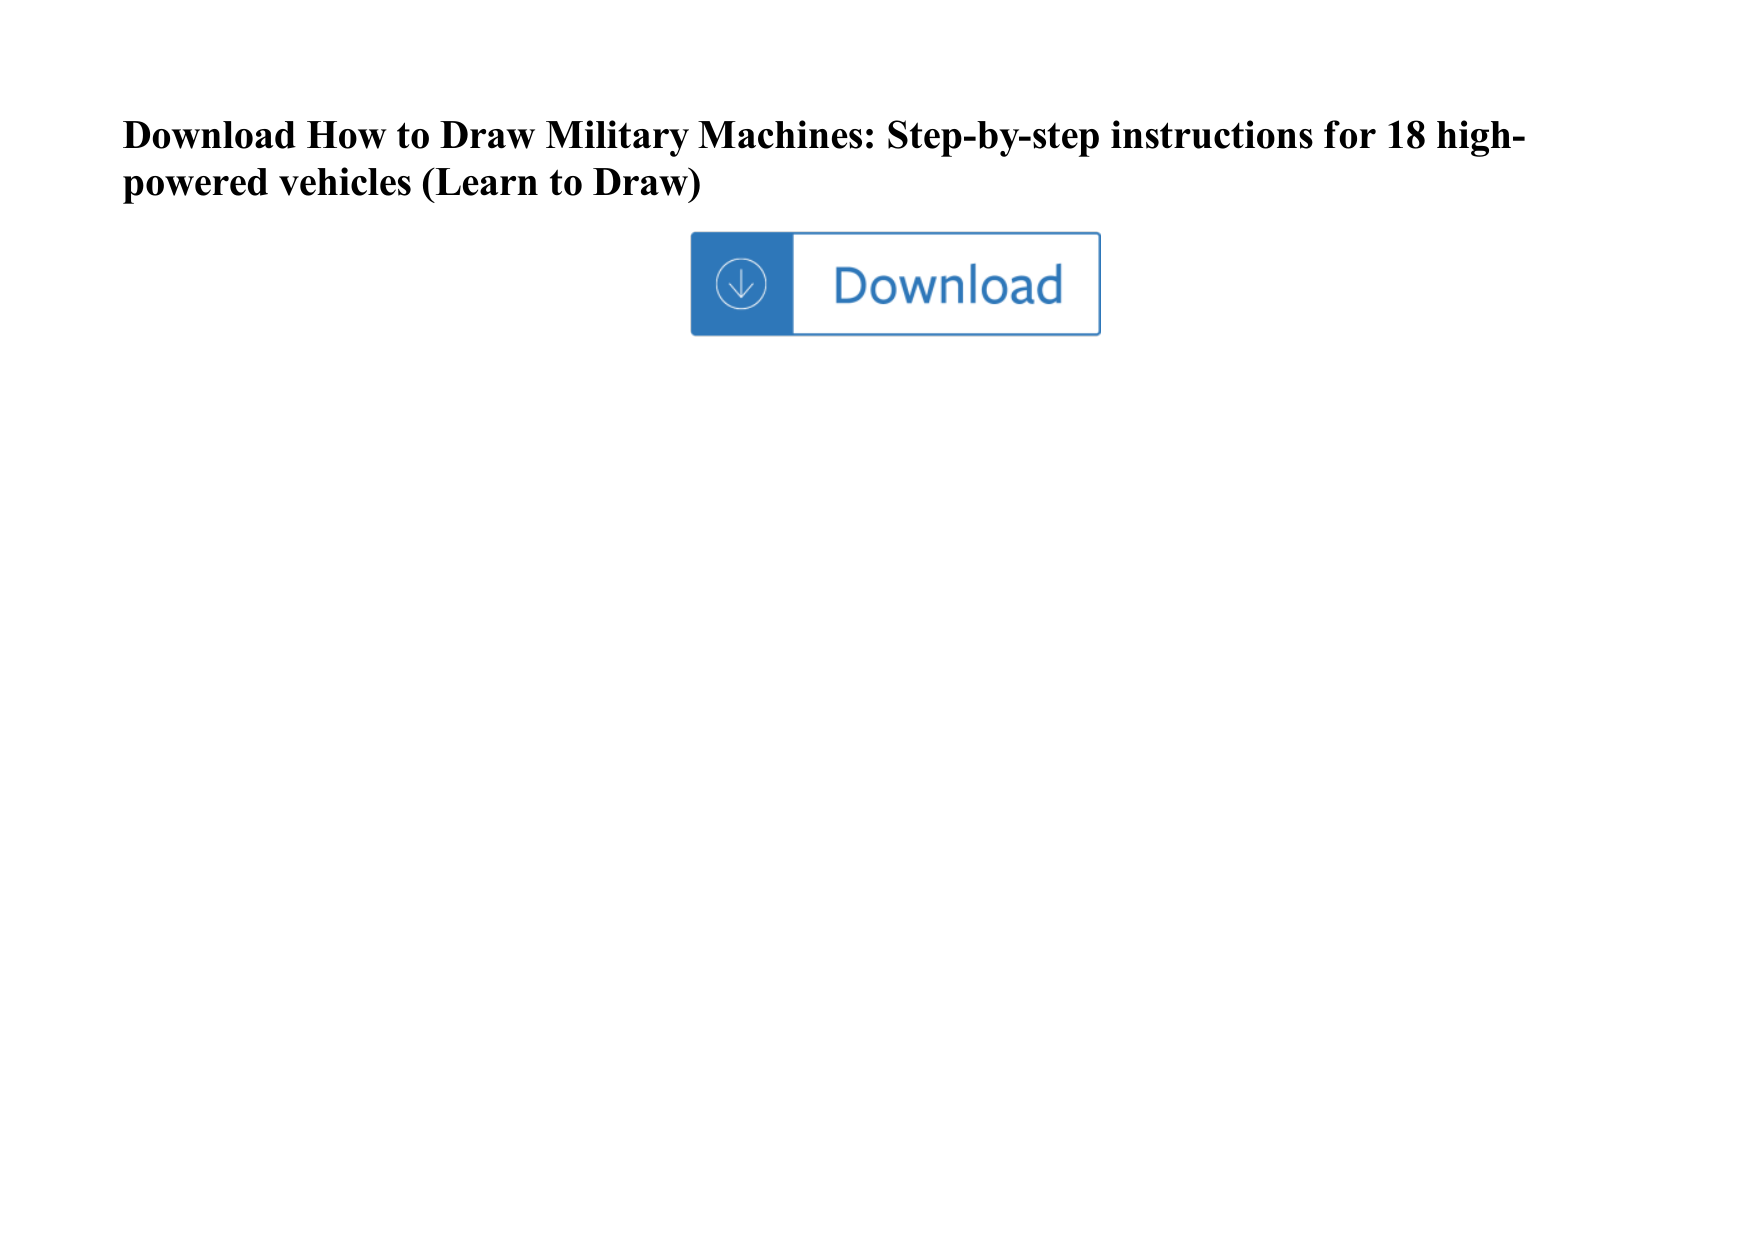 Page 1 of 2 - How To Draw Military Machines: Step-by-step Instructions For 18 High-powered Vehicles (Learn Draw) How-to-draw-military-machines-step-by-step-instructions-for-18-high-powered-vehicles-learn-to-draw